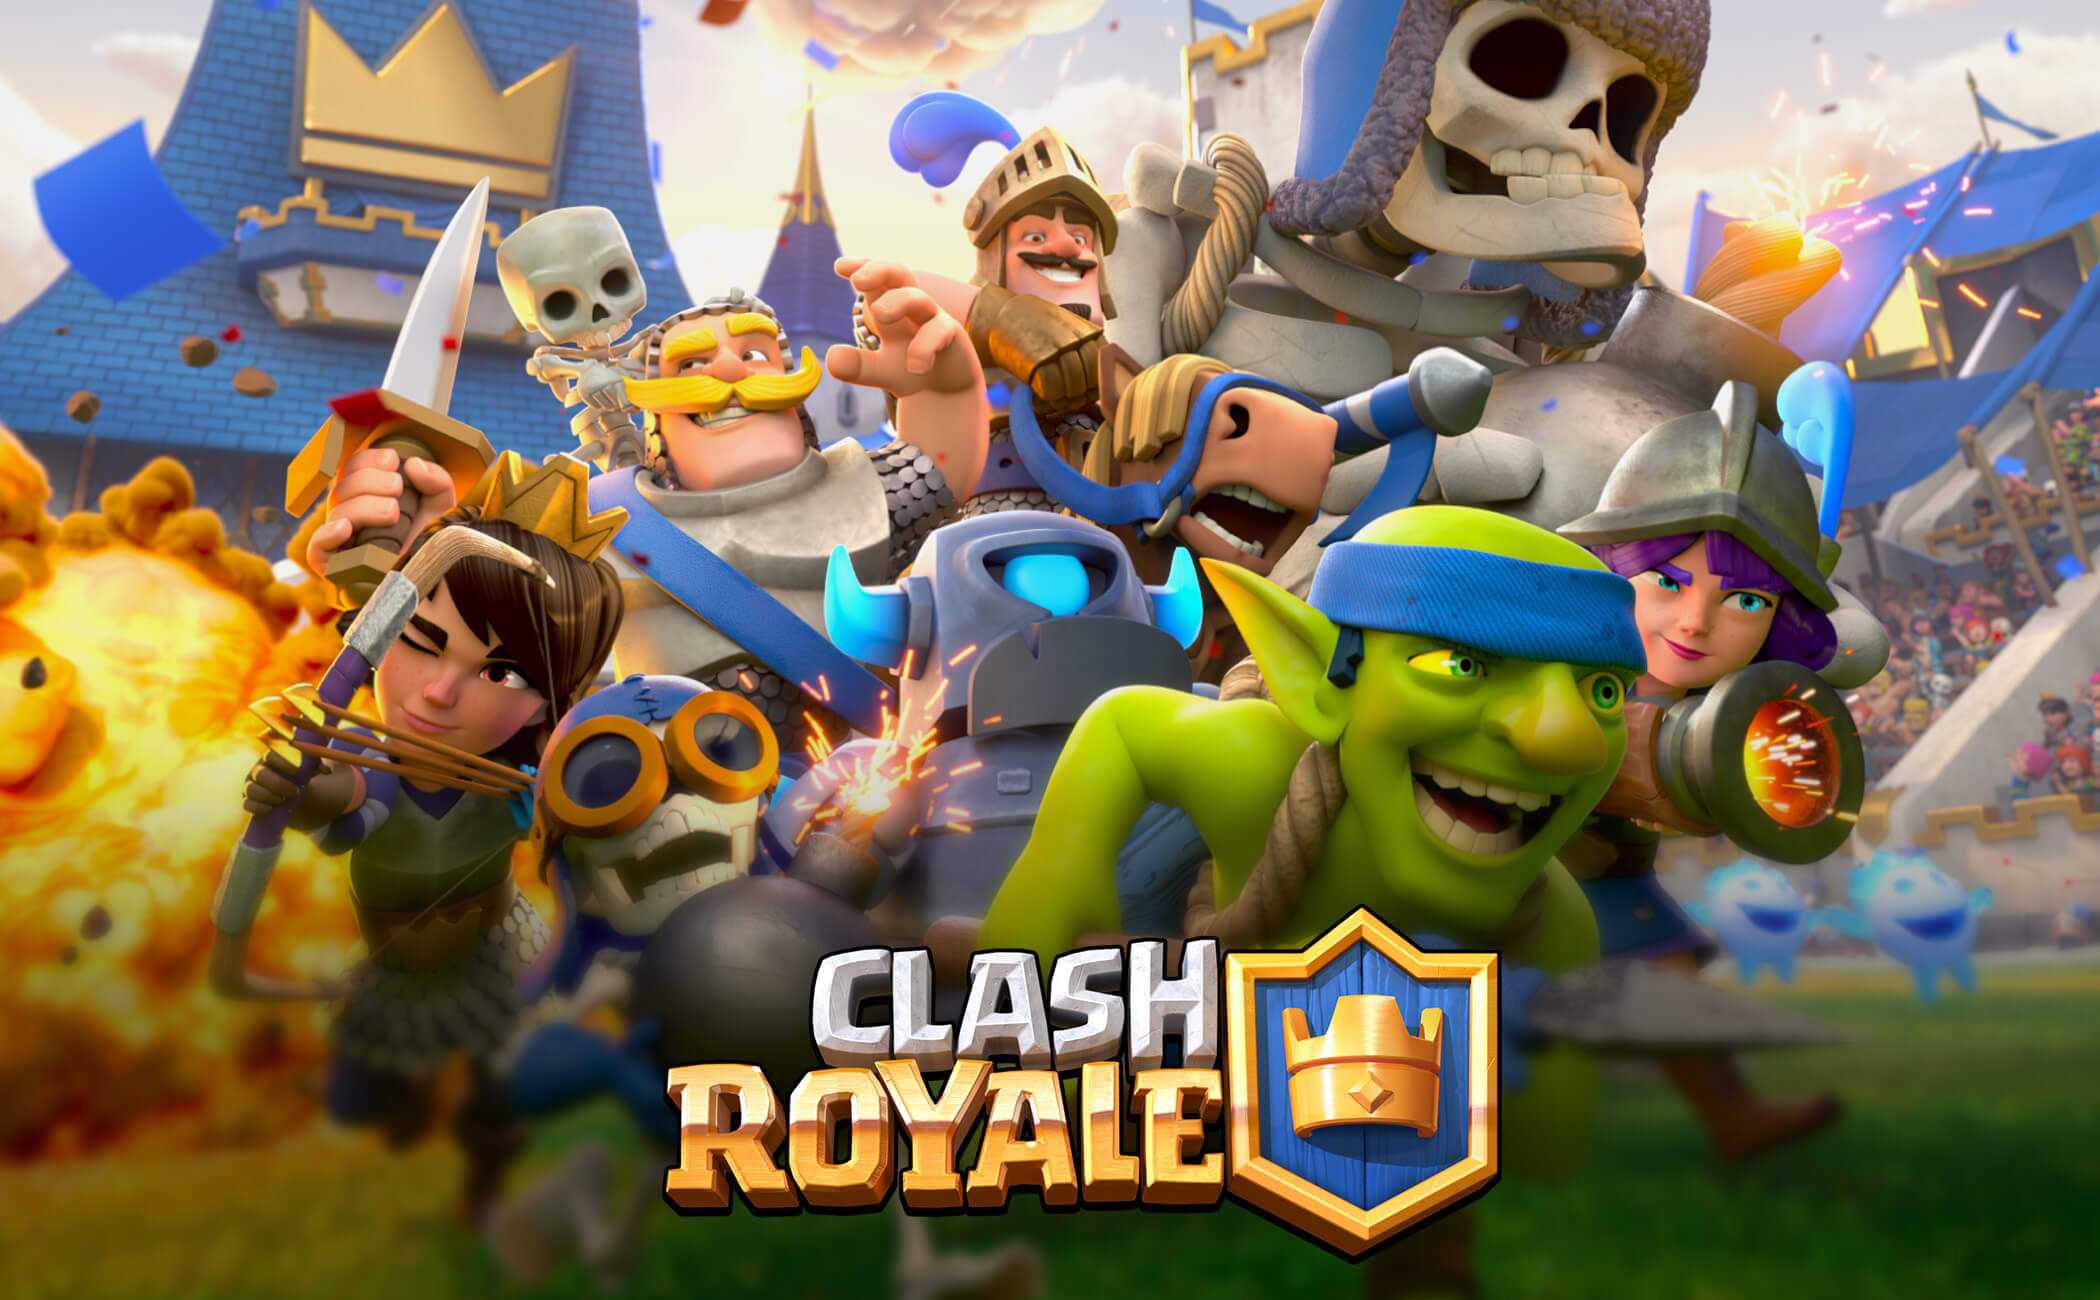 download clash royale new card